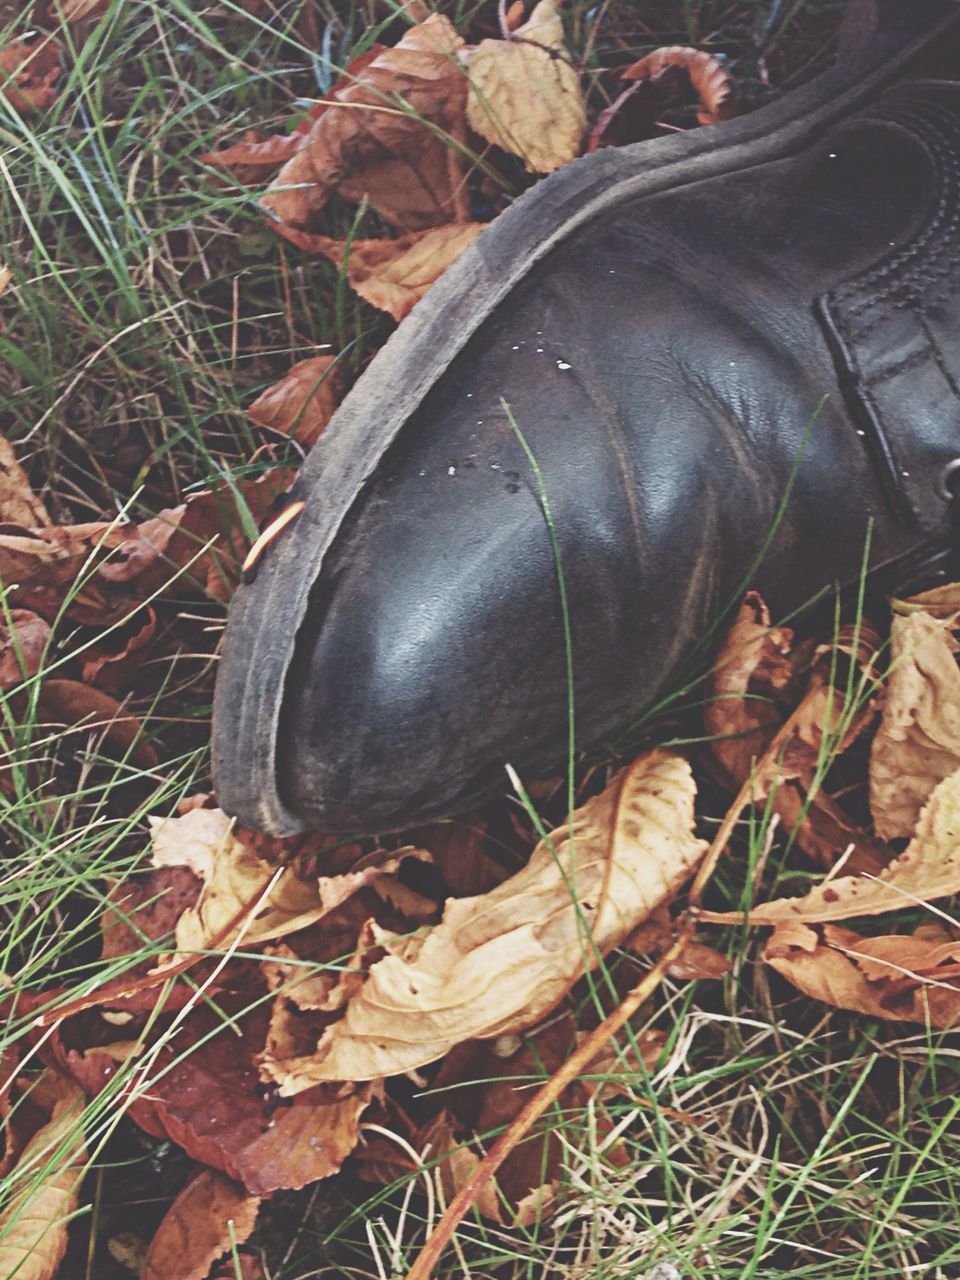 grass, leaf, field, abandoned, high angle view, shoe, obsolete, dry, damaged, close-up, dirty, messy, outdoors, day, dirt, ground, autumn, grassy, deterioration, no people